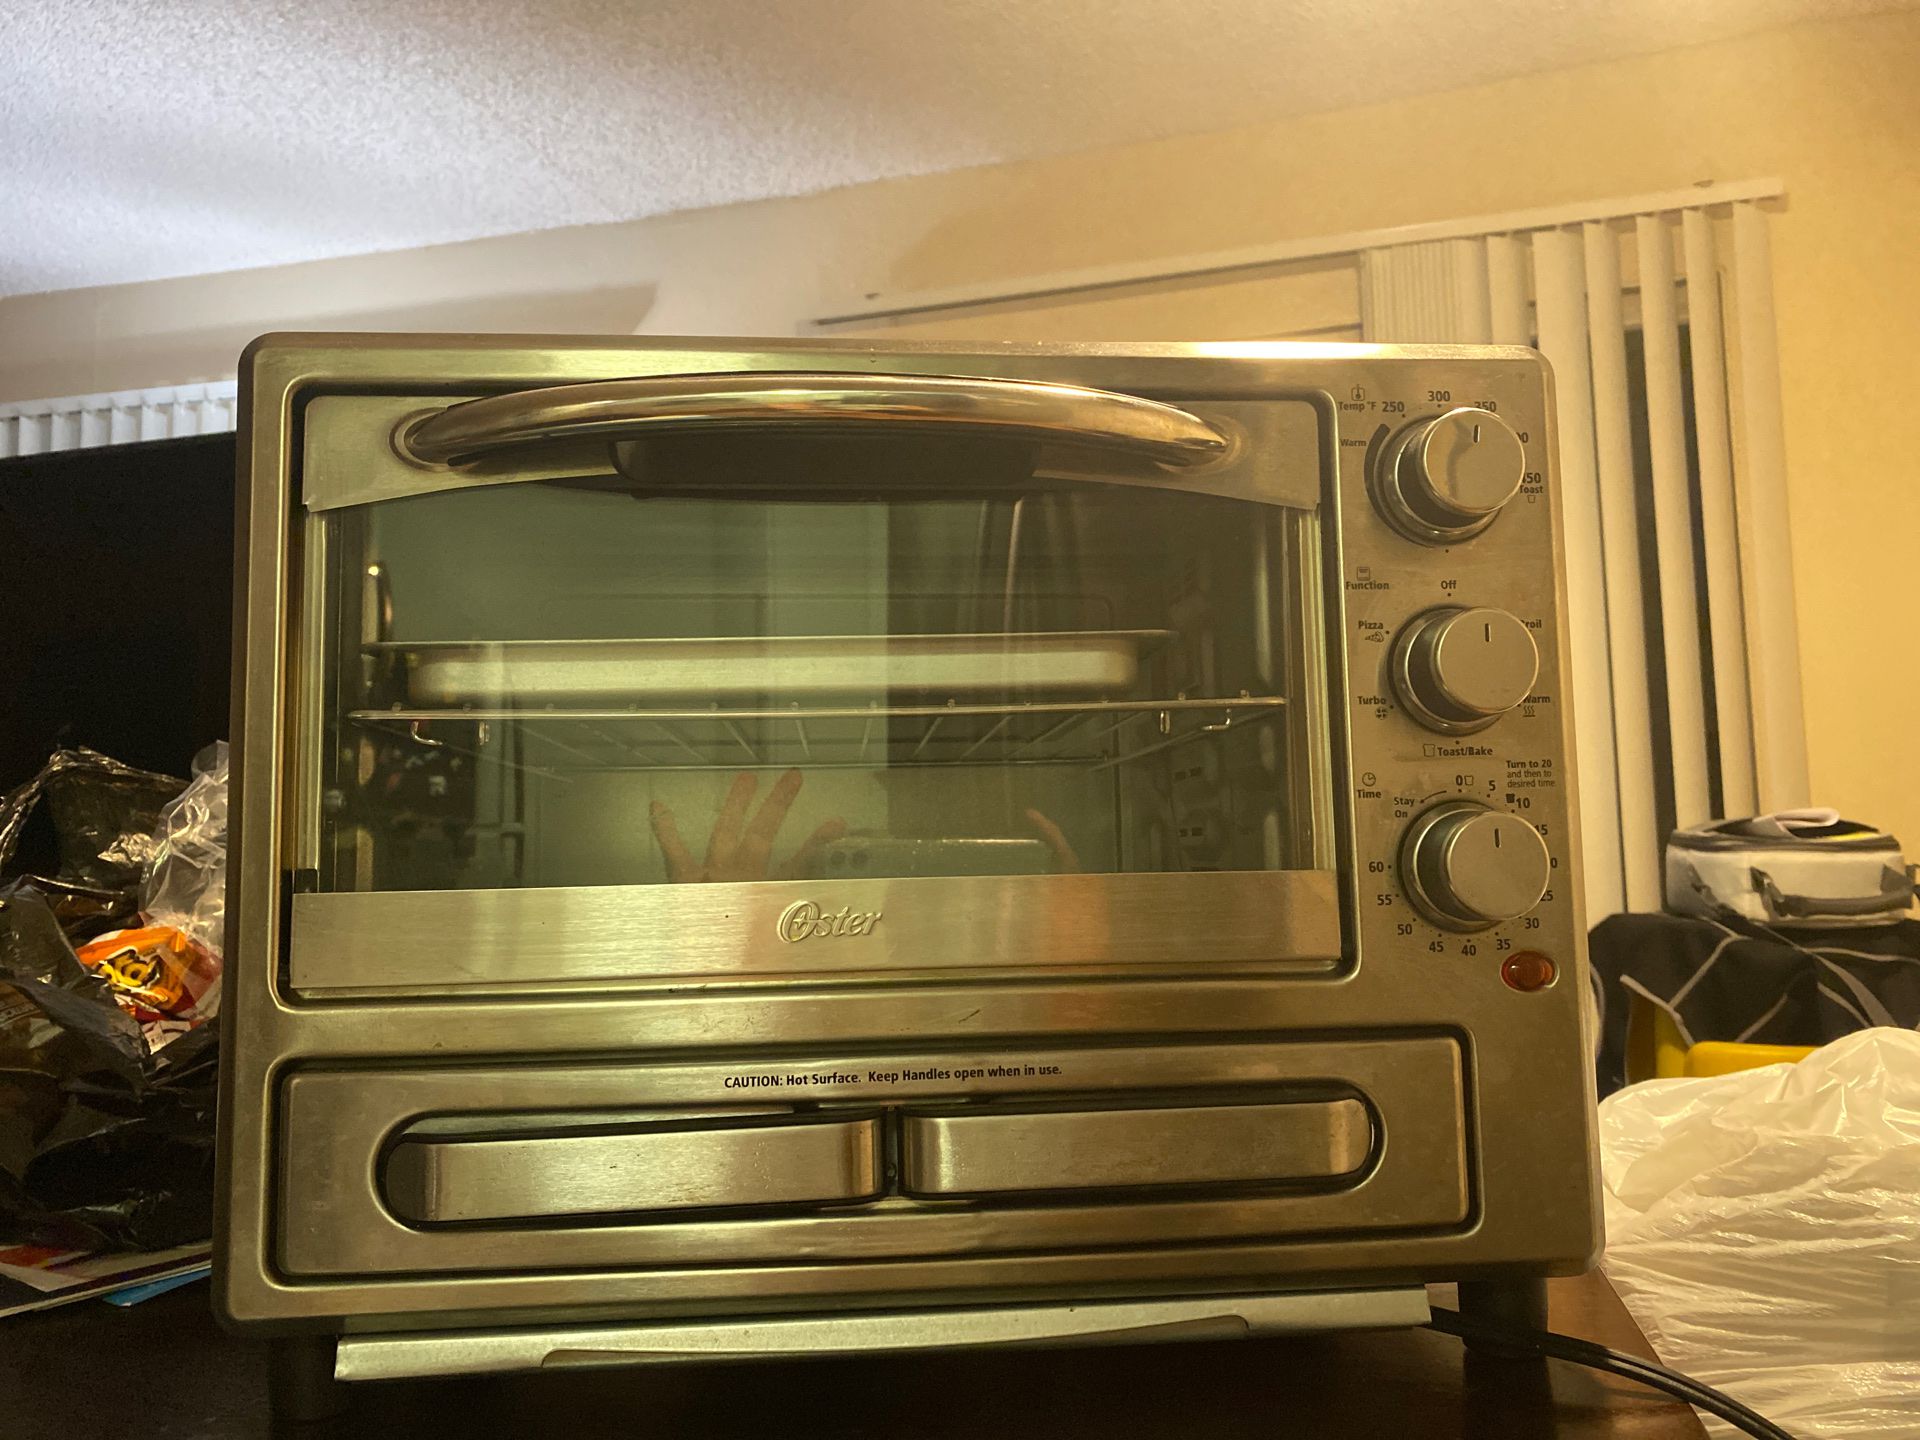 Oster oven